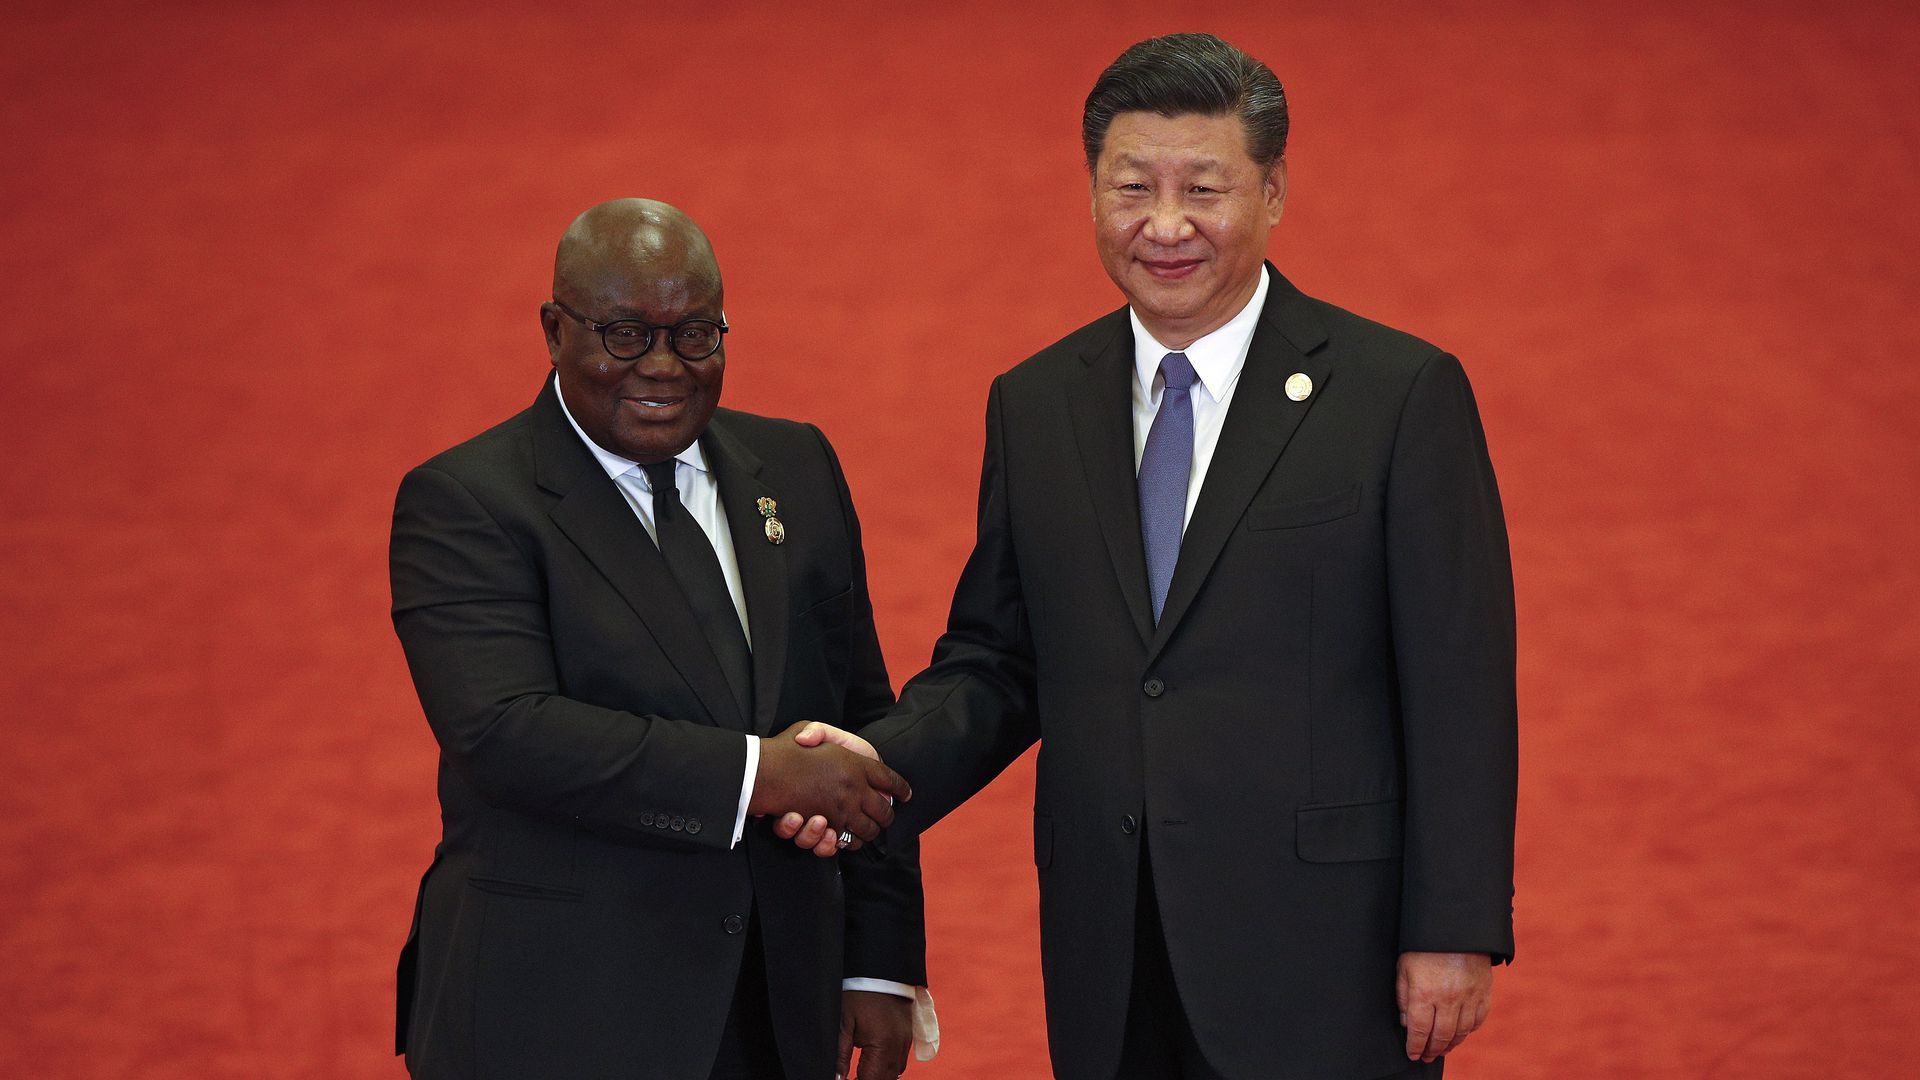 Ghana's President Nana Akufo-Addo shakes hands with Chinese President Xi Jinping in Beijing on September 3, 2018; Photo: Andy Wong/Getty Images